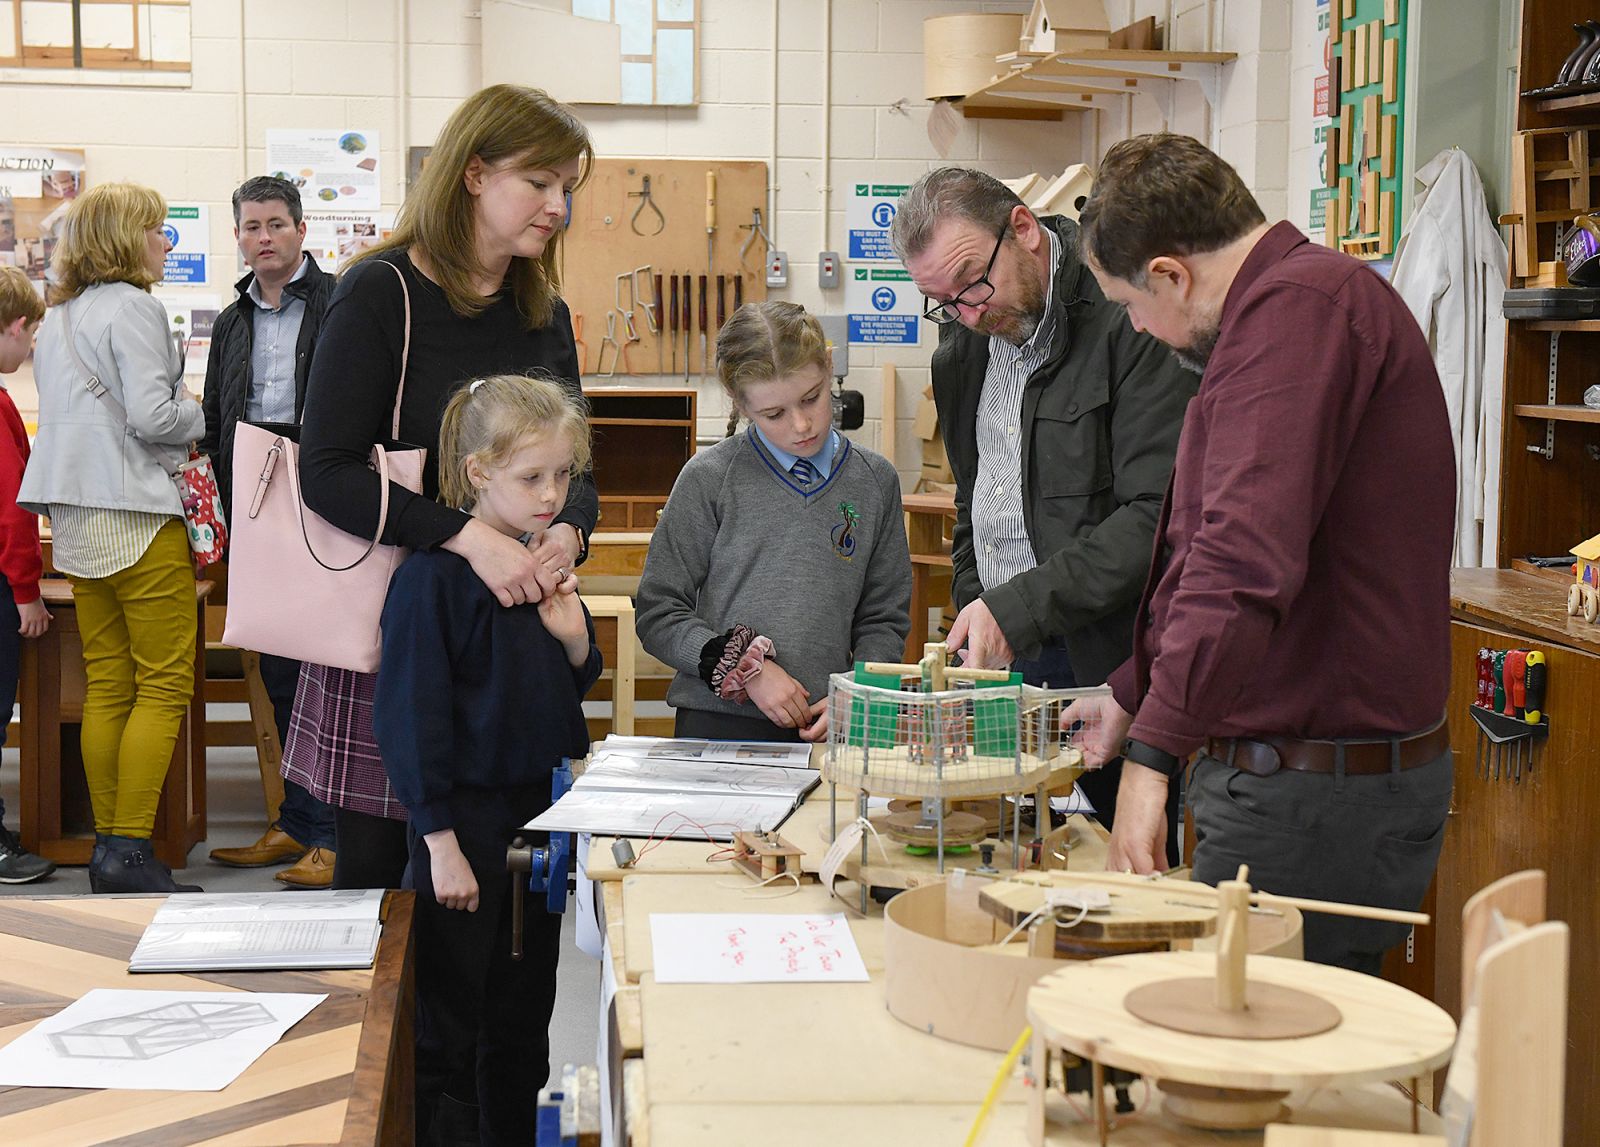 Technology teacher Declan Hynes with some of the visitors at the Dundalk Grammar School Open Day. Picture Ken Finegan/Newspics